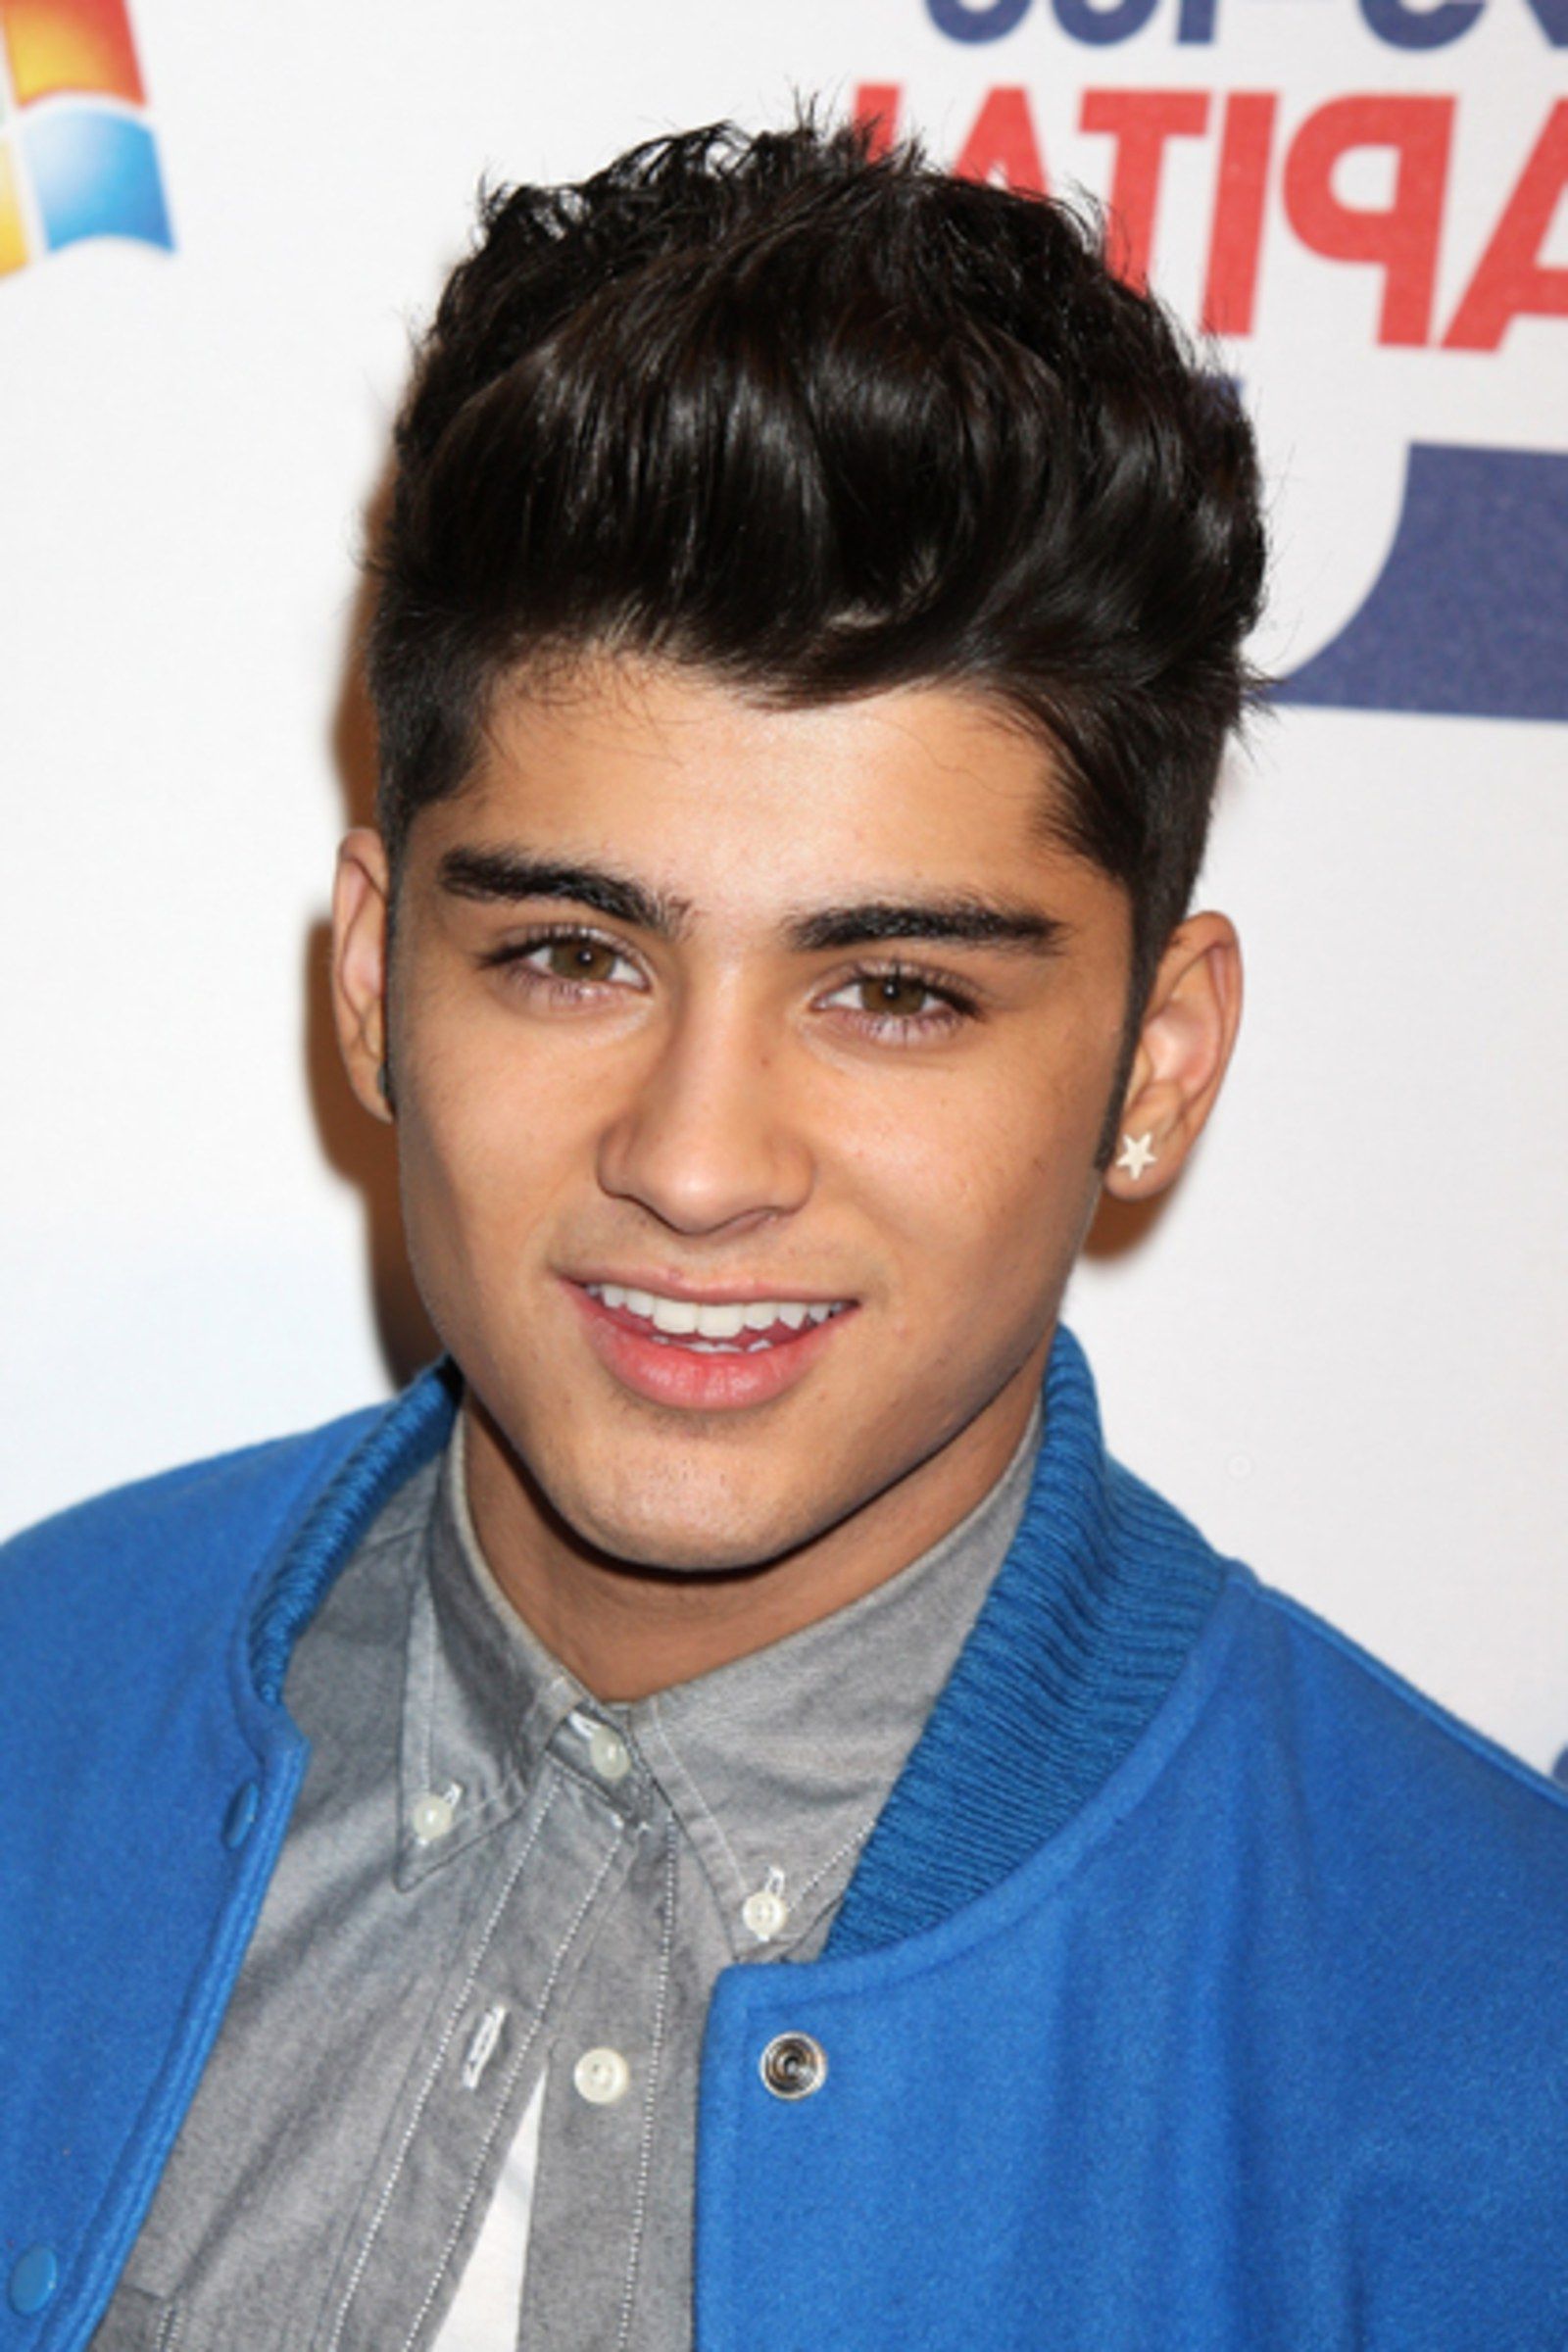 The Hair Evolution Of One Direction's Zayn Malik – Teen Vogue For Lavender Haircuts With Side Part (View 17 of 20)